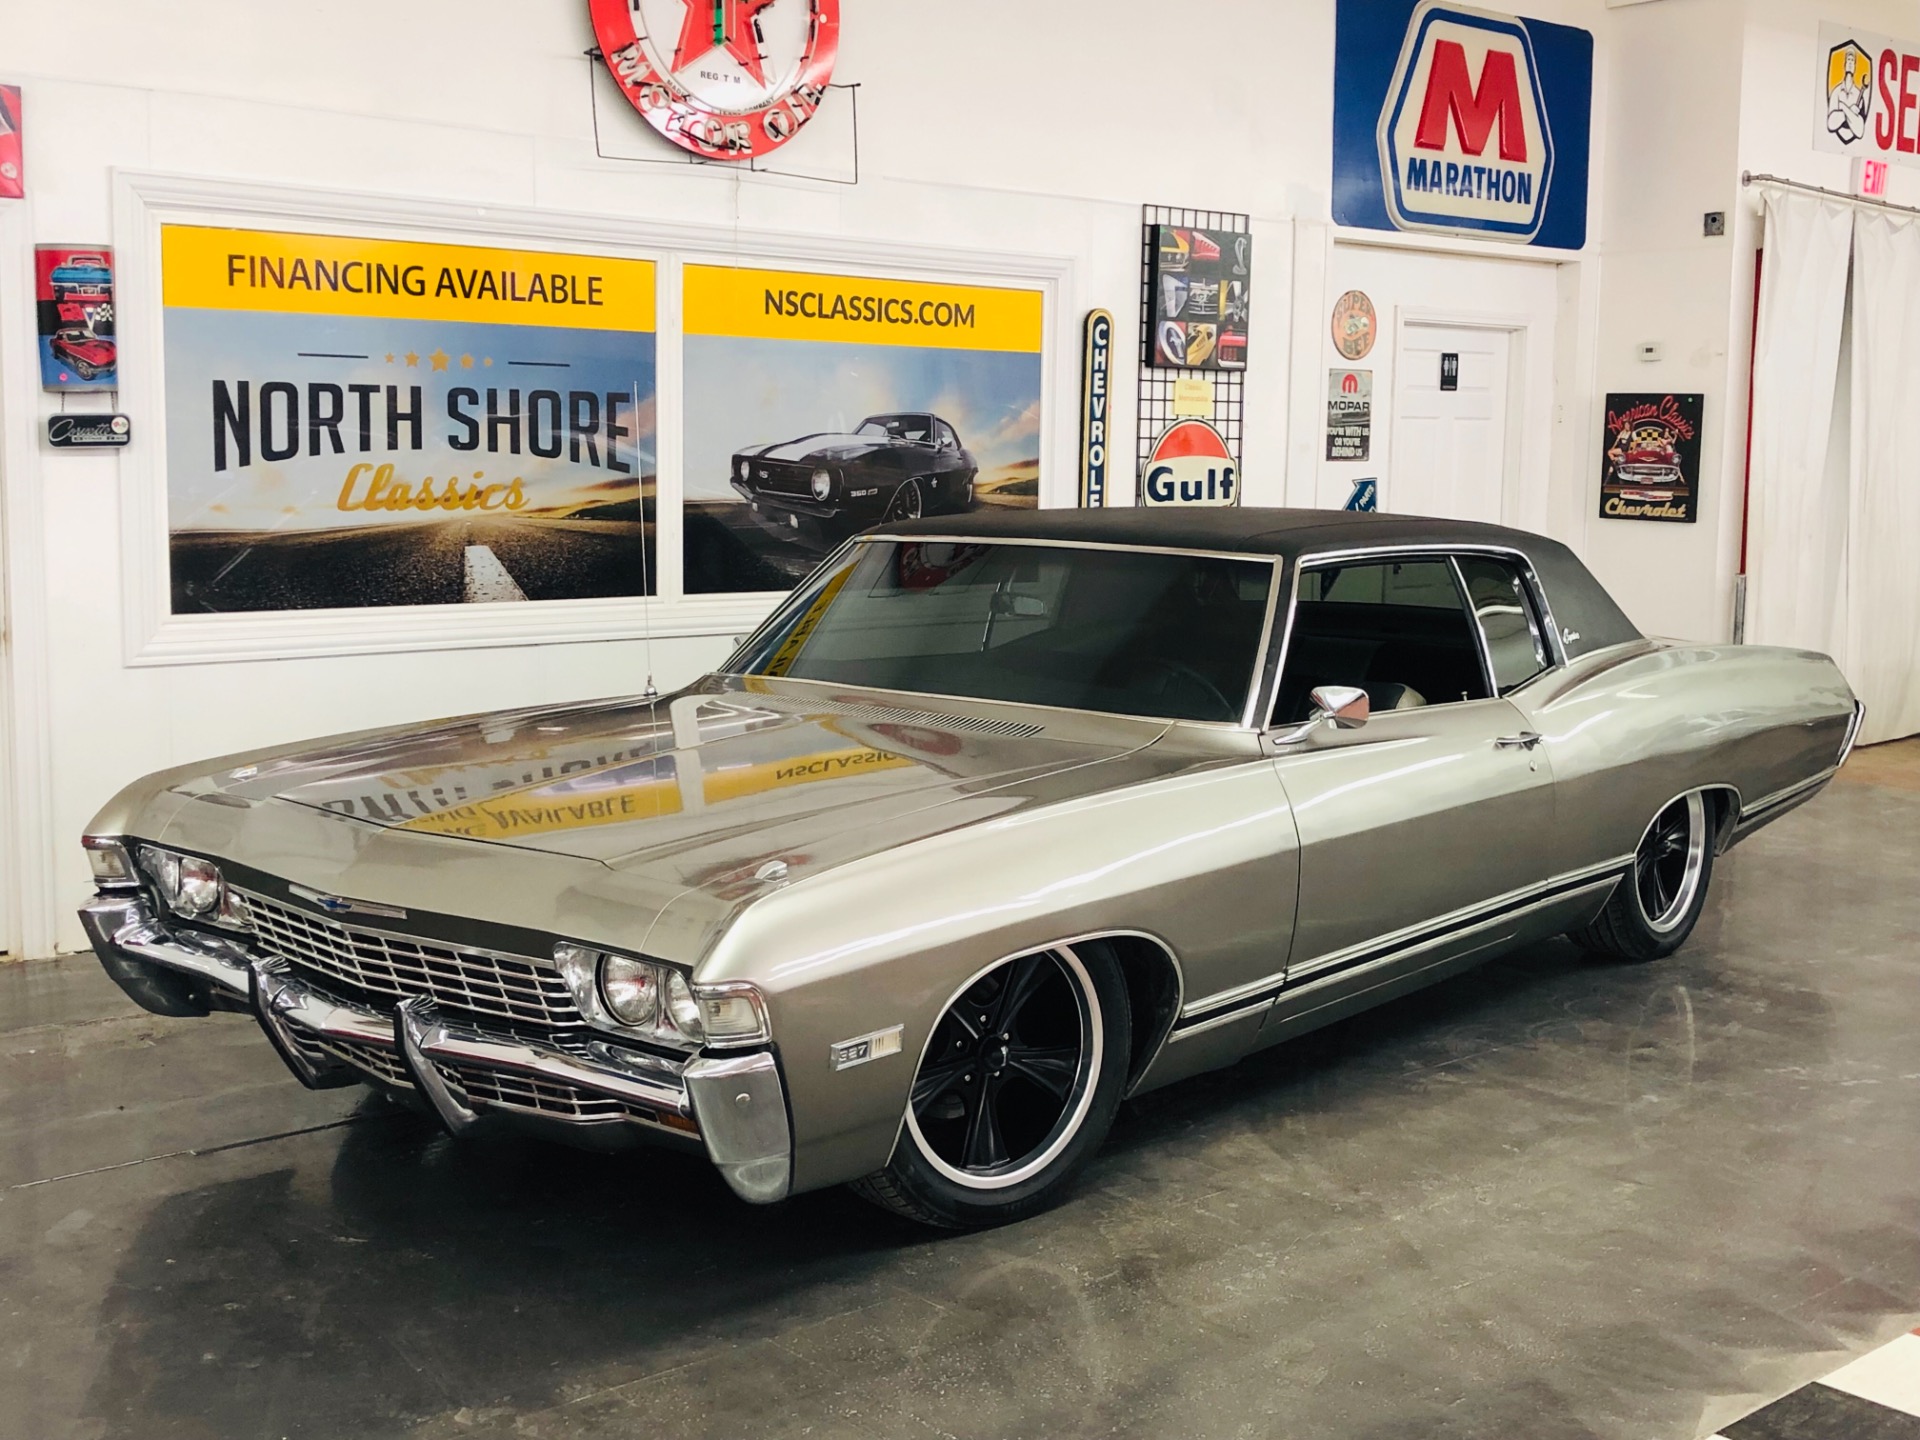 krom stapel Verleiden Used 1968 Chevrolet Caprice -NEW LOW PRICE -COOL CUSTOM CAPRICE- AIR RIDE-  NEW PAINT- SEE VIDEO For Sale (Sold) | North Shore Classics Stock #68327KFCV